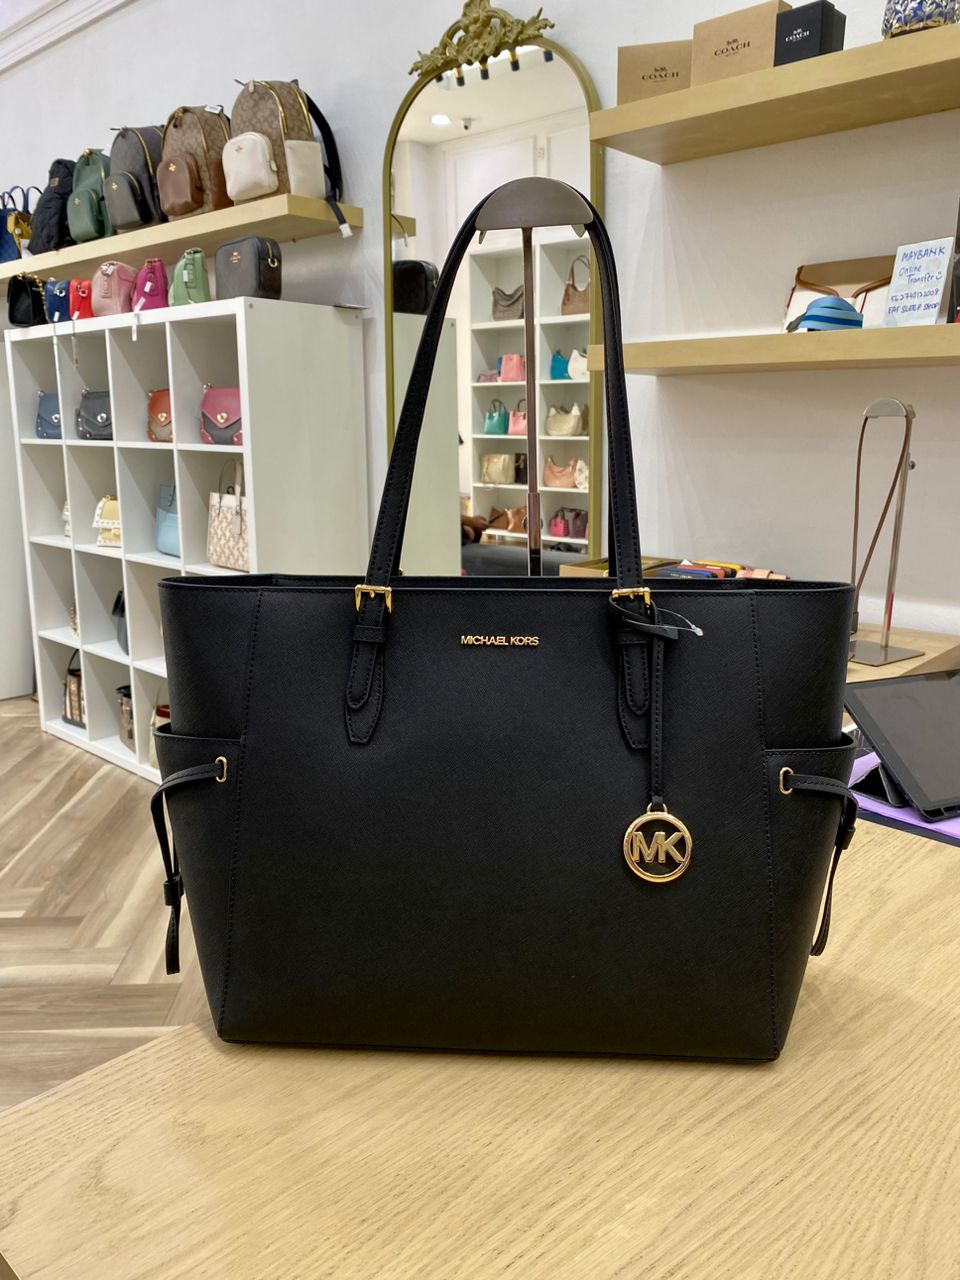 Michael Kors Outlet: Michael bag in saffiano leather - Black